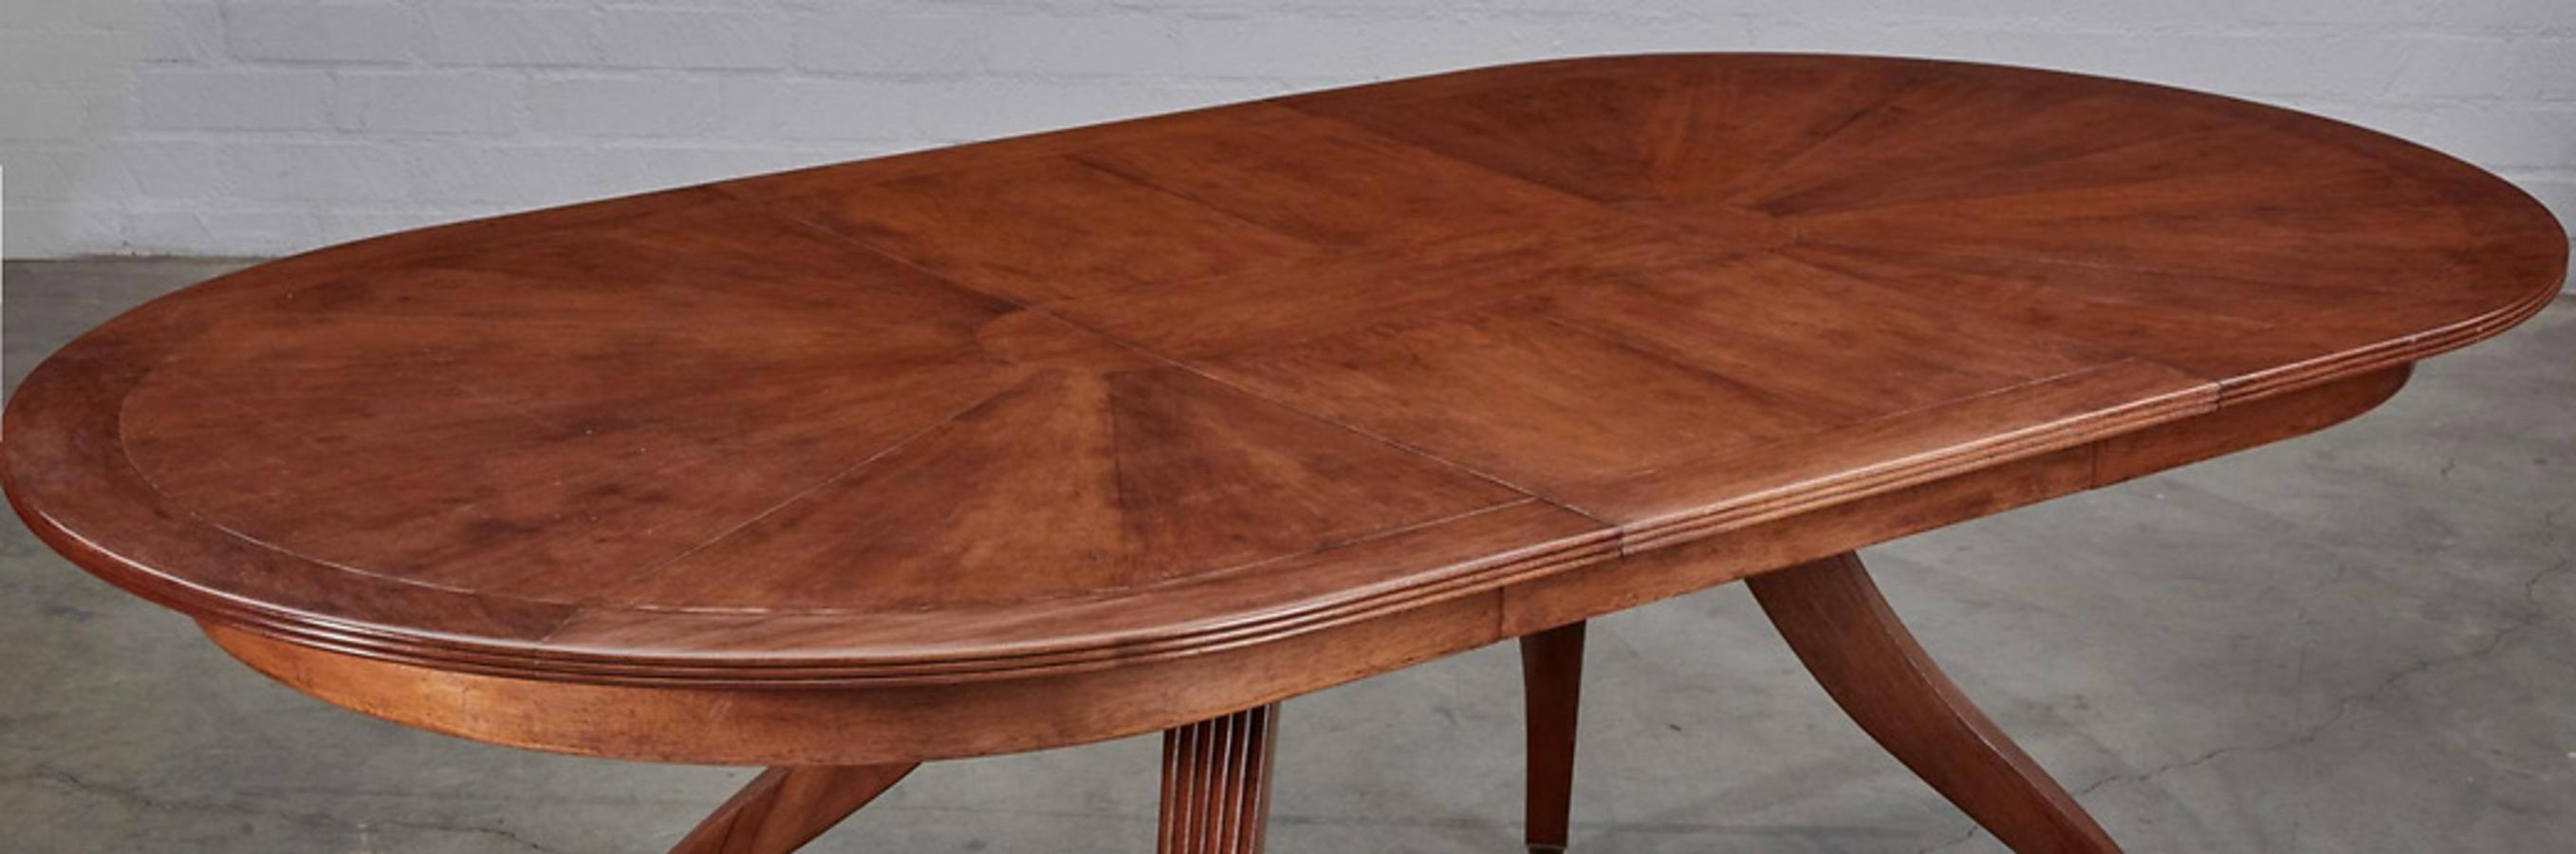 Hand-Crafted Rose Tarlow Regency Sunburst Walnut Dining Table with Extension 60